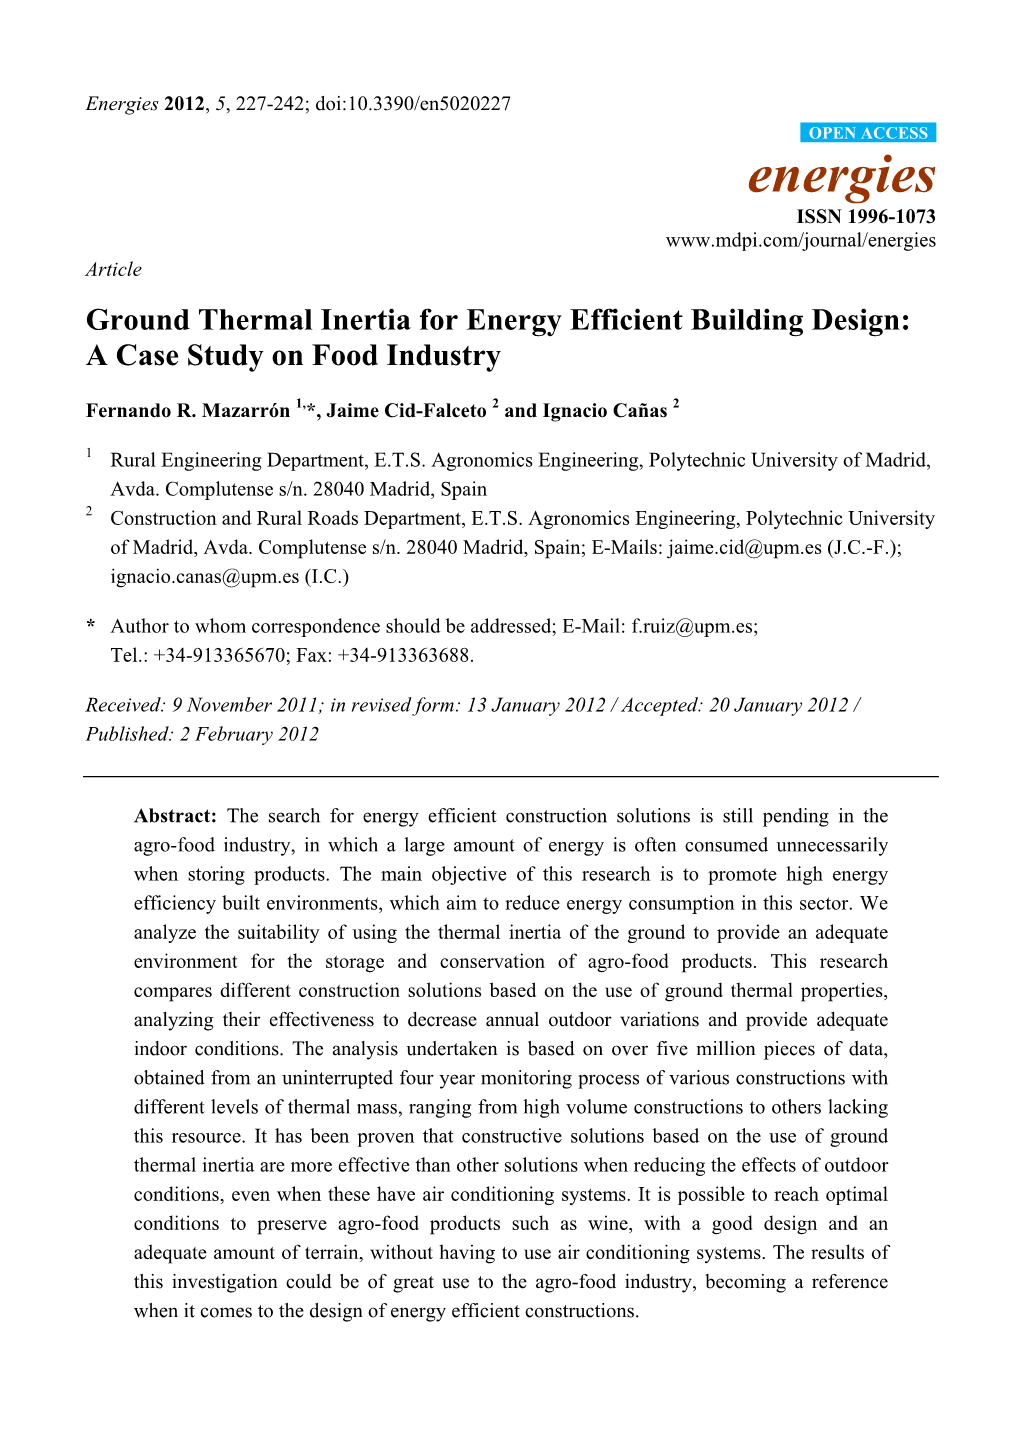 Ground Thermal Inertia for Energy Efficient Building Design: a Case Study on Food Industry